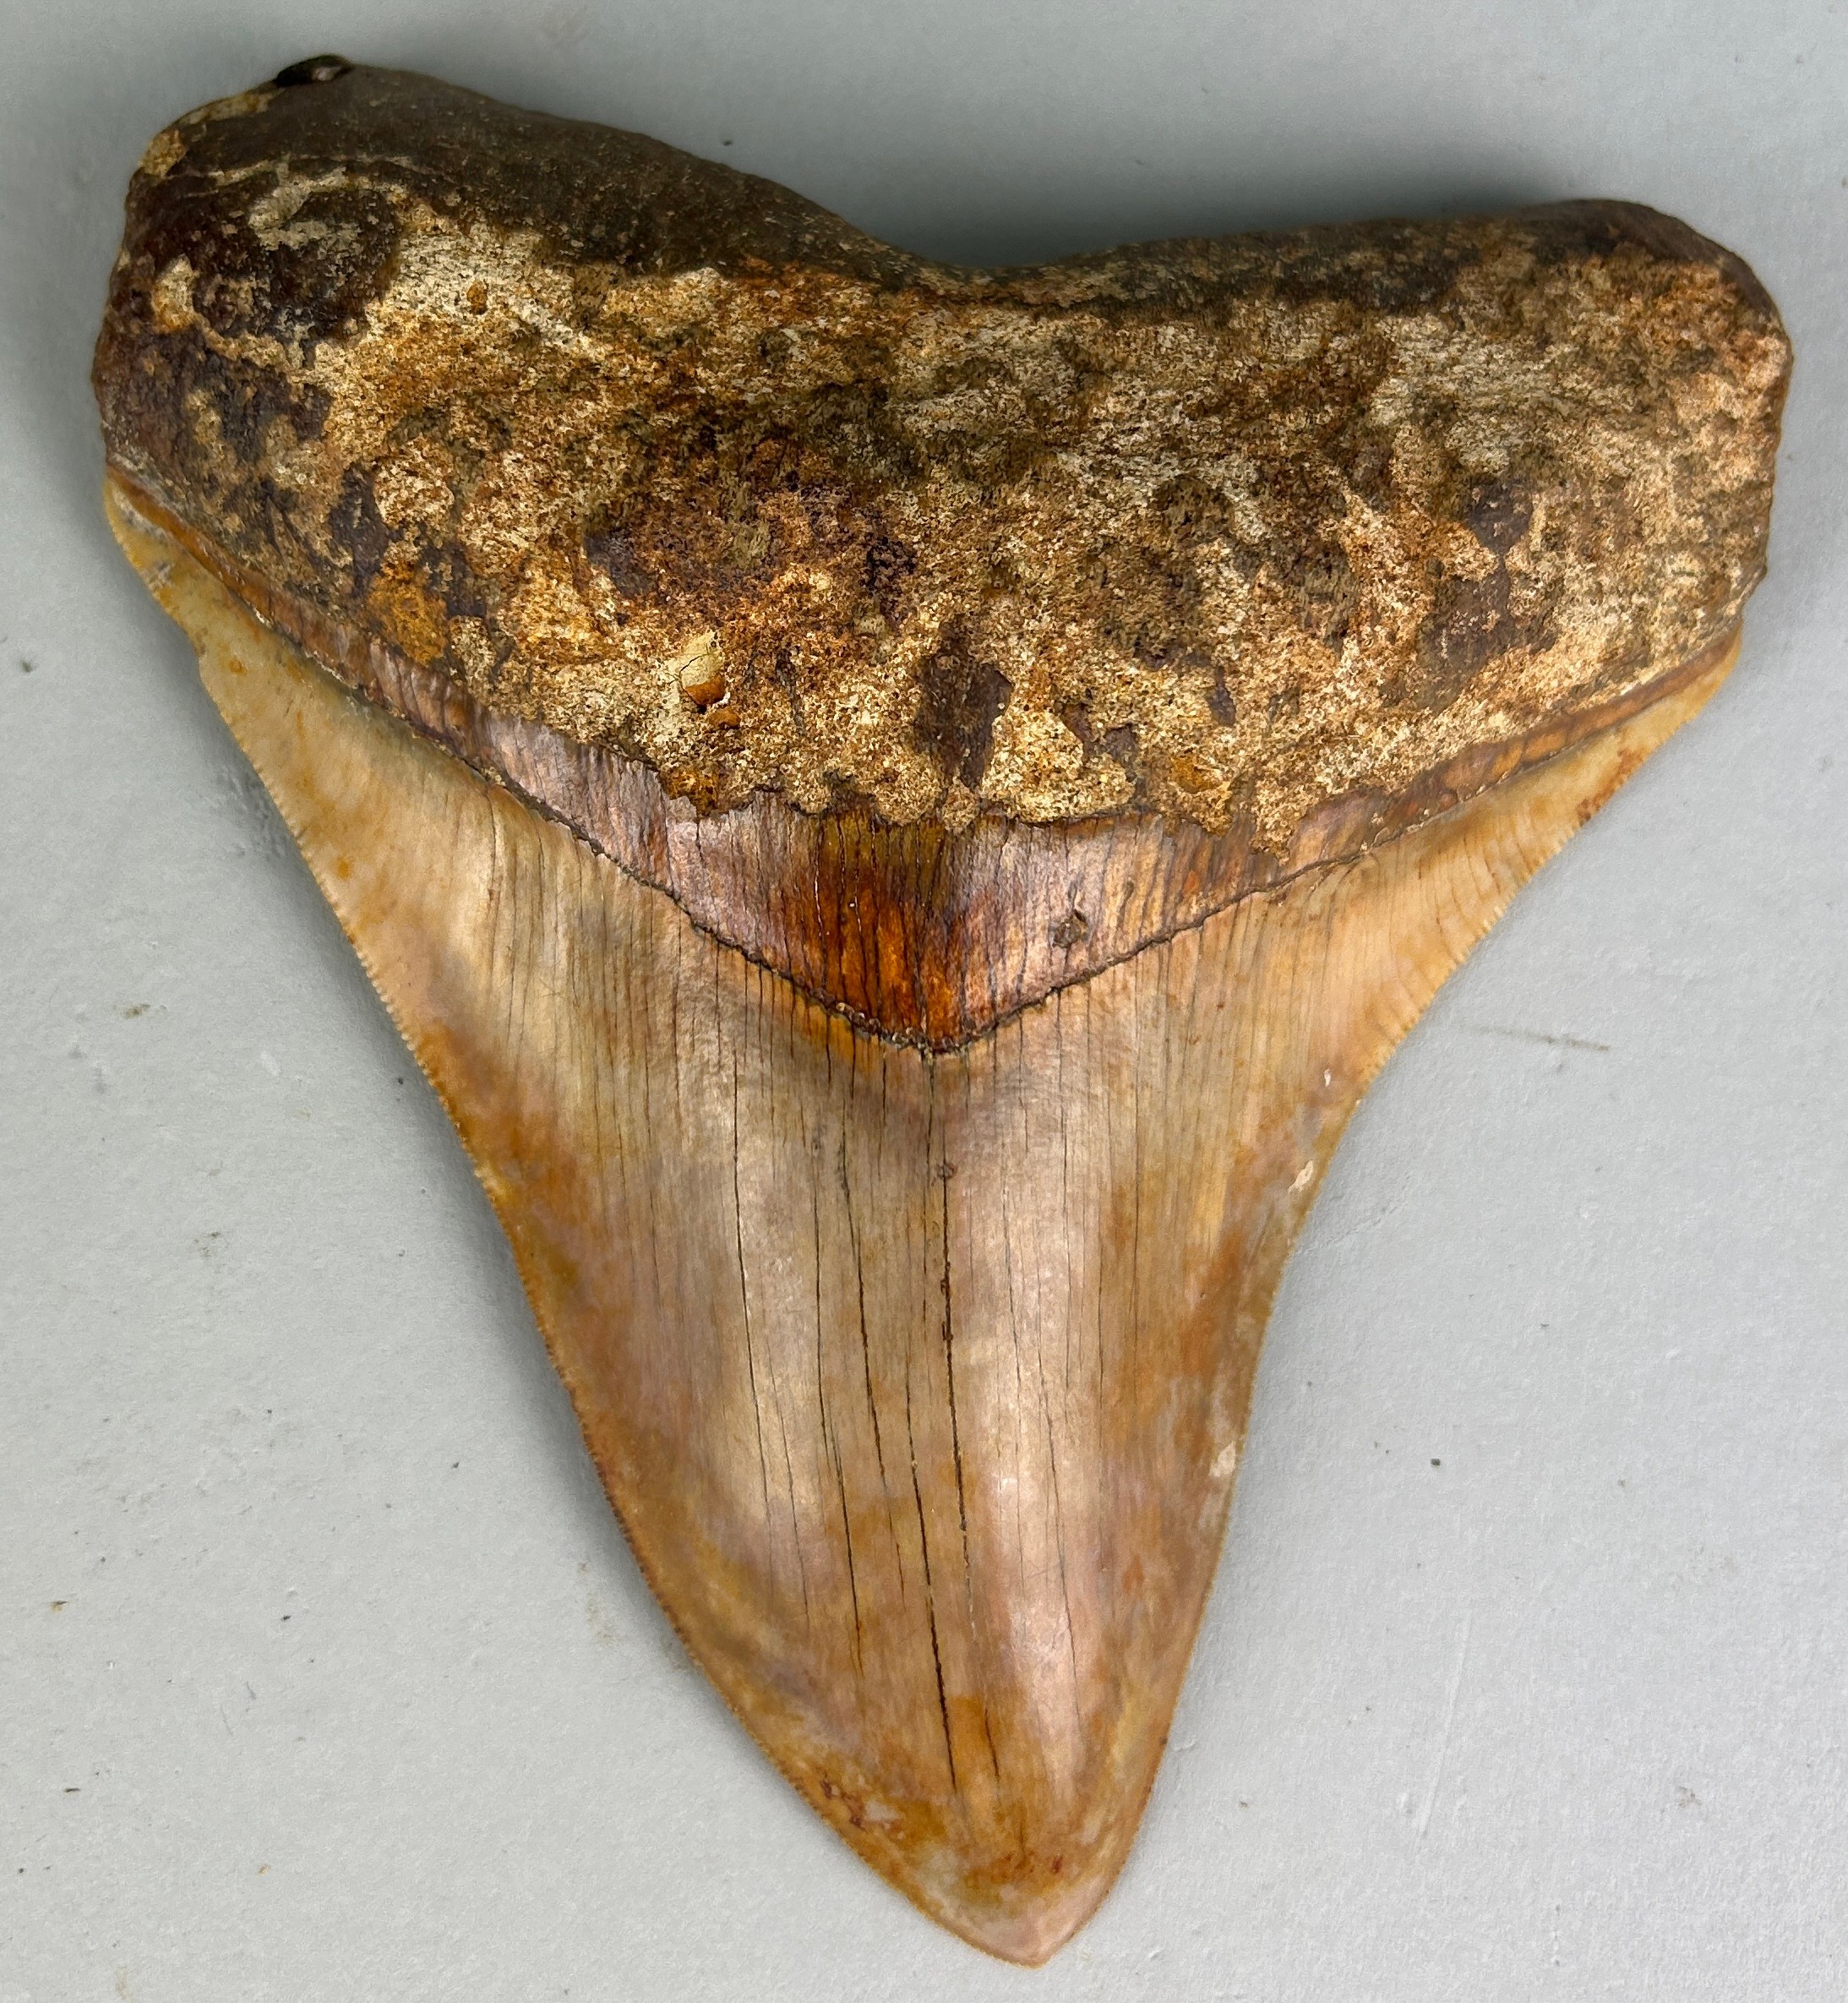 A LARGE MEGALODON TOOTH FOSSIL, From Bandung, West Java, Indonesia. Miocene circa 5-10 million years - Image 2 of 2